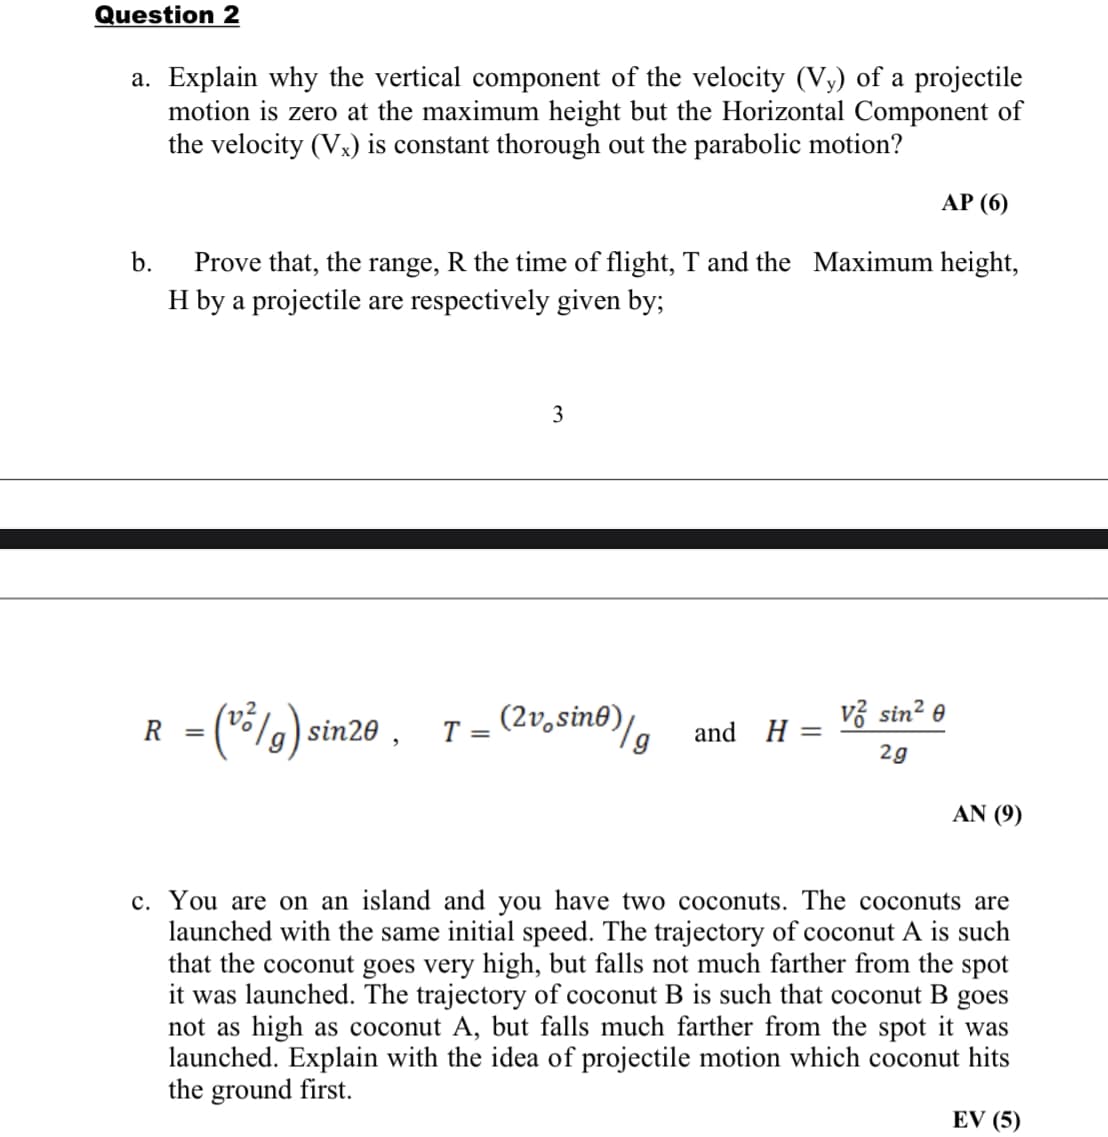 Question 2
a. Explain why the vertical component of the velocity (Vy) of a projectile
motion is zero at the maximum height but the Horizontal Component of
the velocity (Vx) is constant thorough out the parabolic motion?
АР (6)
b.
Prove that, the range, R the time of flight, T and the Maximum height,
H by a projectile are respectively given by;
3
Fla) sin20 ,
(2v,sin®)/
vở sin? e
R
T =
and H =
2g
AN (9)
c. You are on an island and you have two coconuts. The coconuts are
launched with the same initial speed. The trajectory of coconut A is such
that the coconut goes very high, but falls not much farther from the spot
it was launched. The trajectory of coconut B is such that coconut B goes
not as high as coconut A, but falls much farther from the spot it was
launched. Explain with the idea of projectile motion which coconut hits
the ground first.
EV (5)
